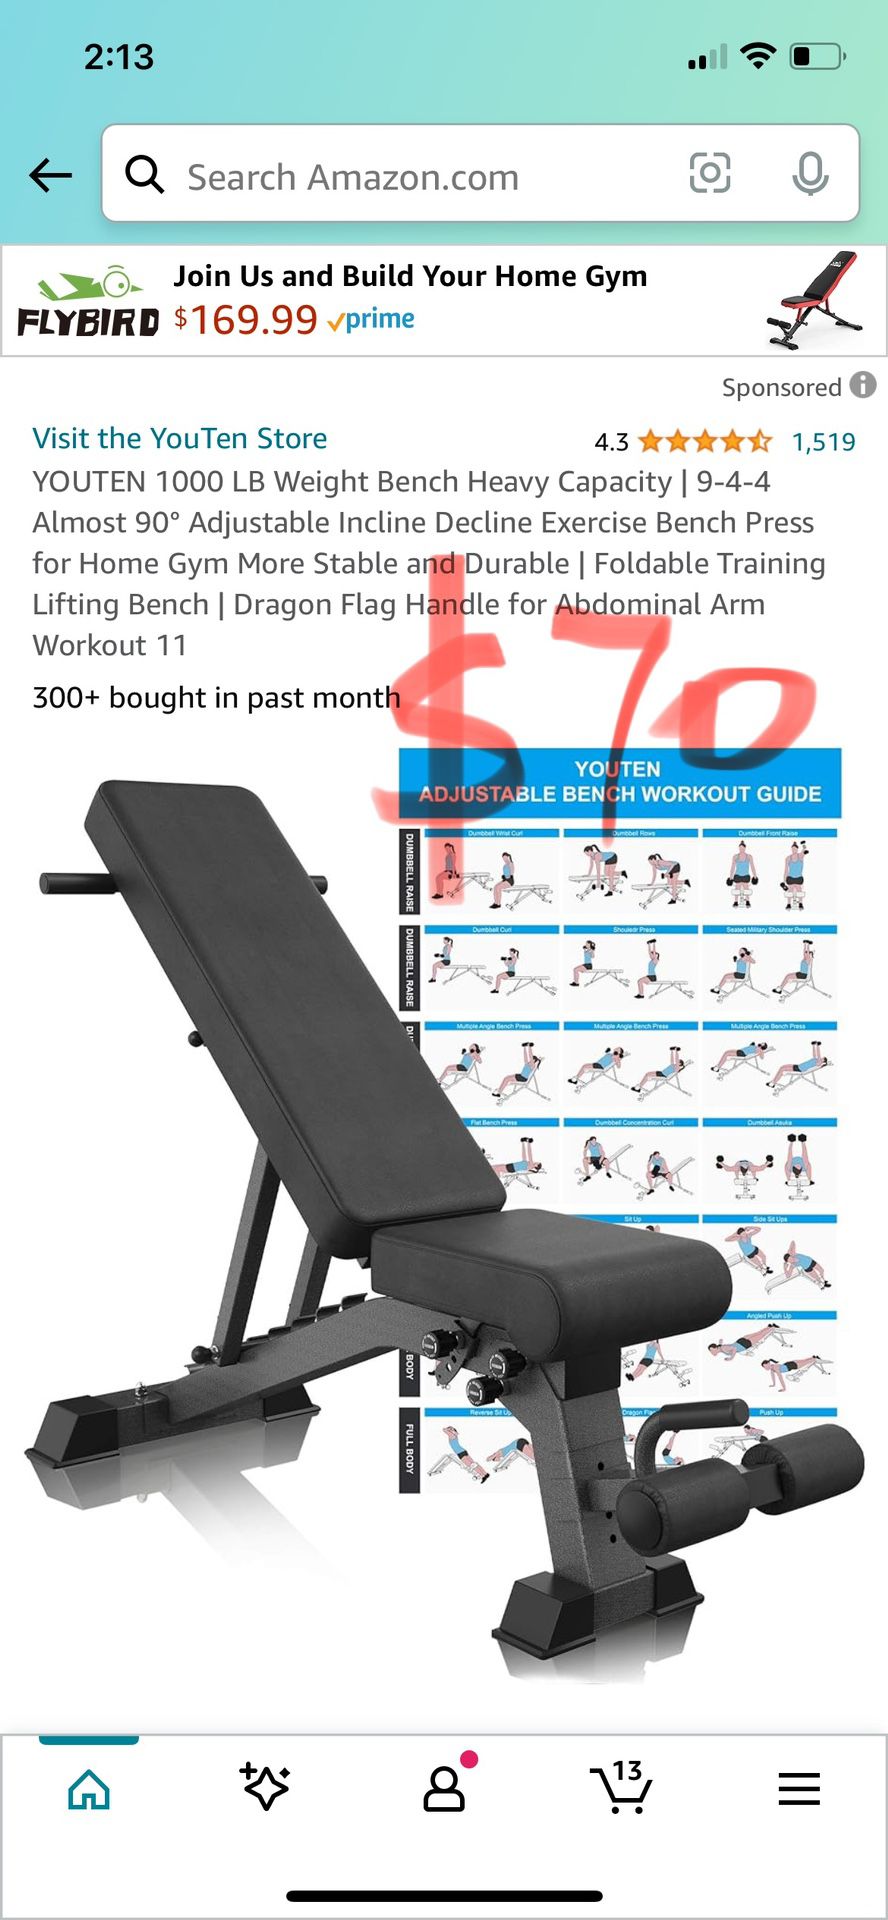 YOUTEN 1000 LB Weight Bench Heavy Capacity | 9-4-4 Almost 90° Adjustable Incline Decline Exercise Bench Press for Home Gym More Stable and Durable | F